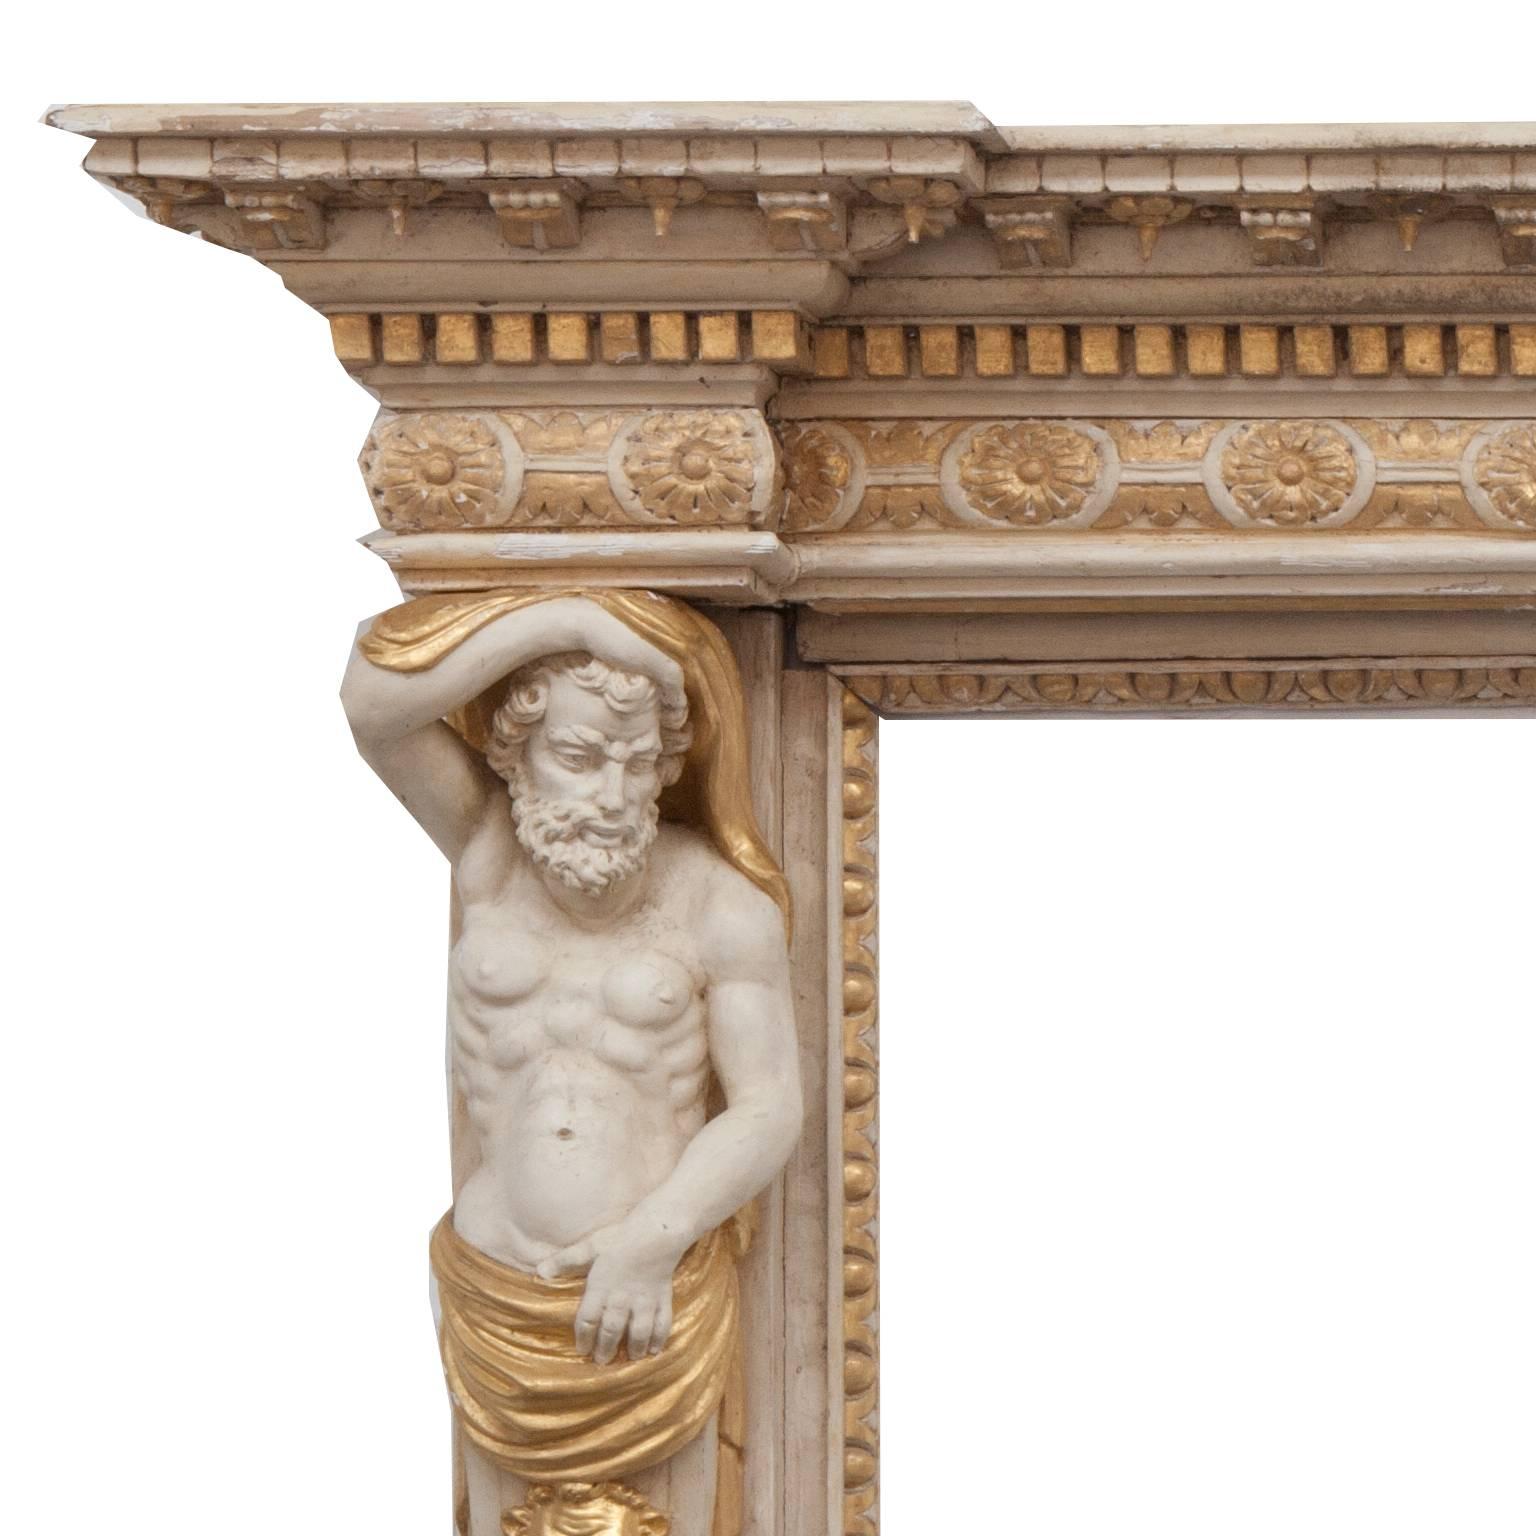 Large 18th century hand-carved Georgian pine fireplace mantel, with bearded caryatid vertical figures and lion mask decoration. Original paint and gilt remain showing a truly fine example of the periods craftsmanship for this most rare fireplace